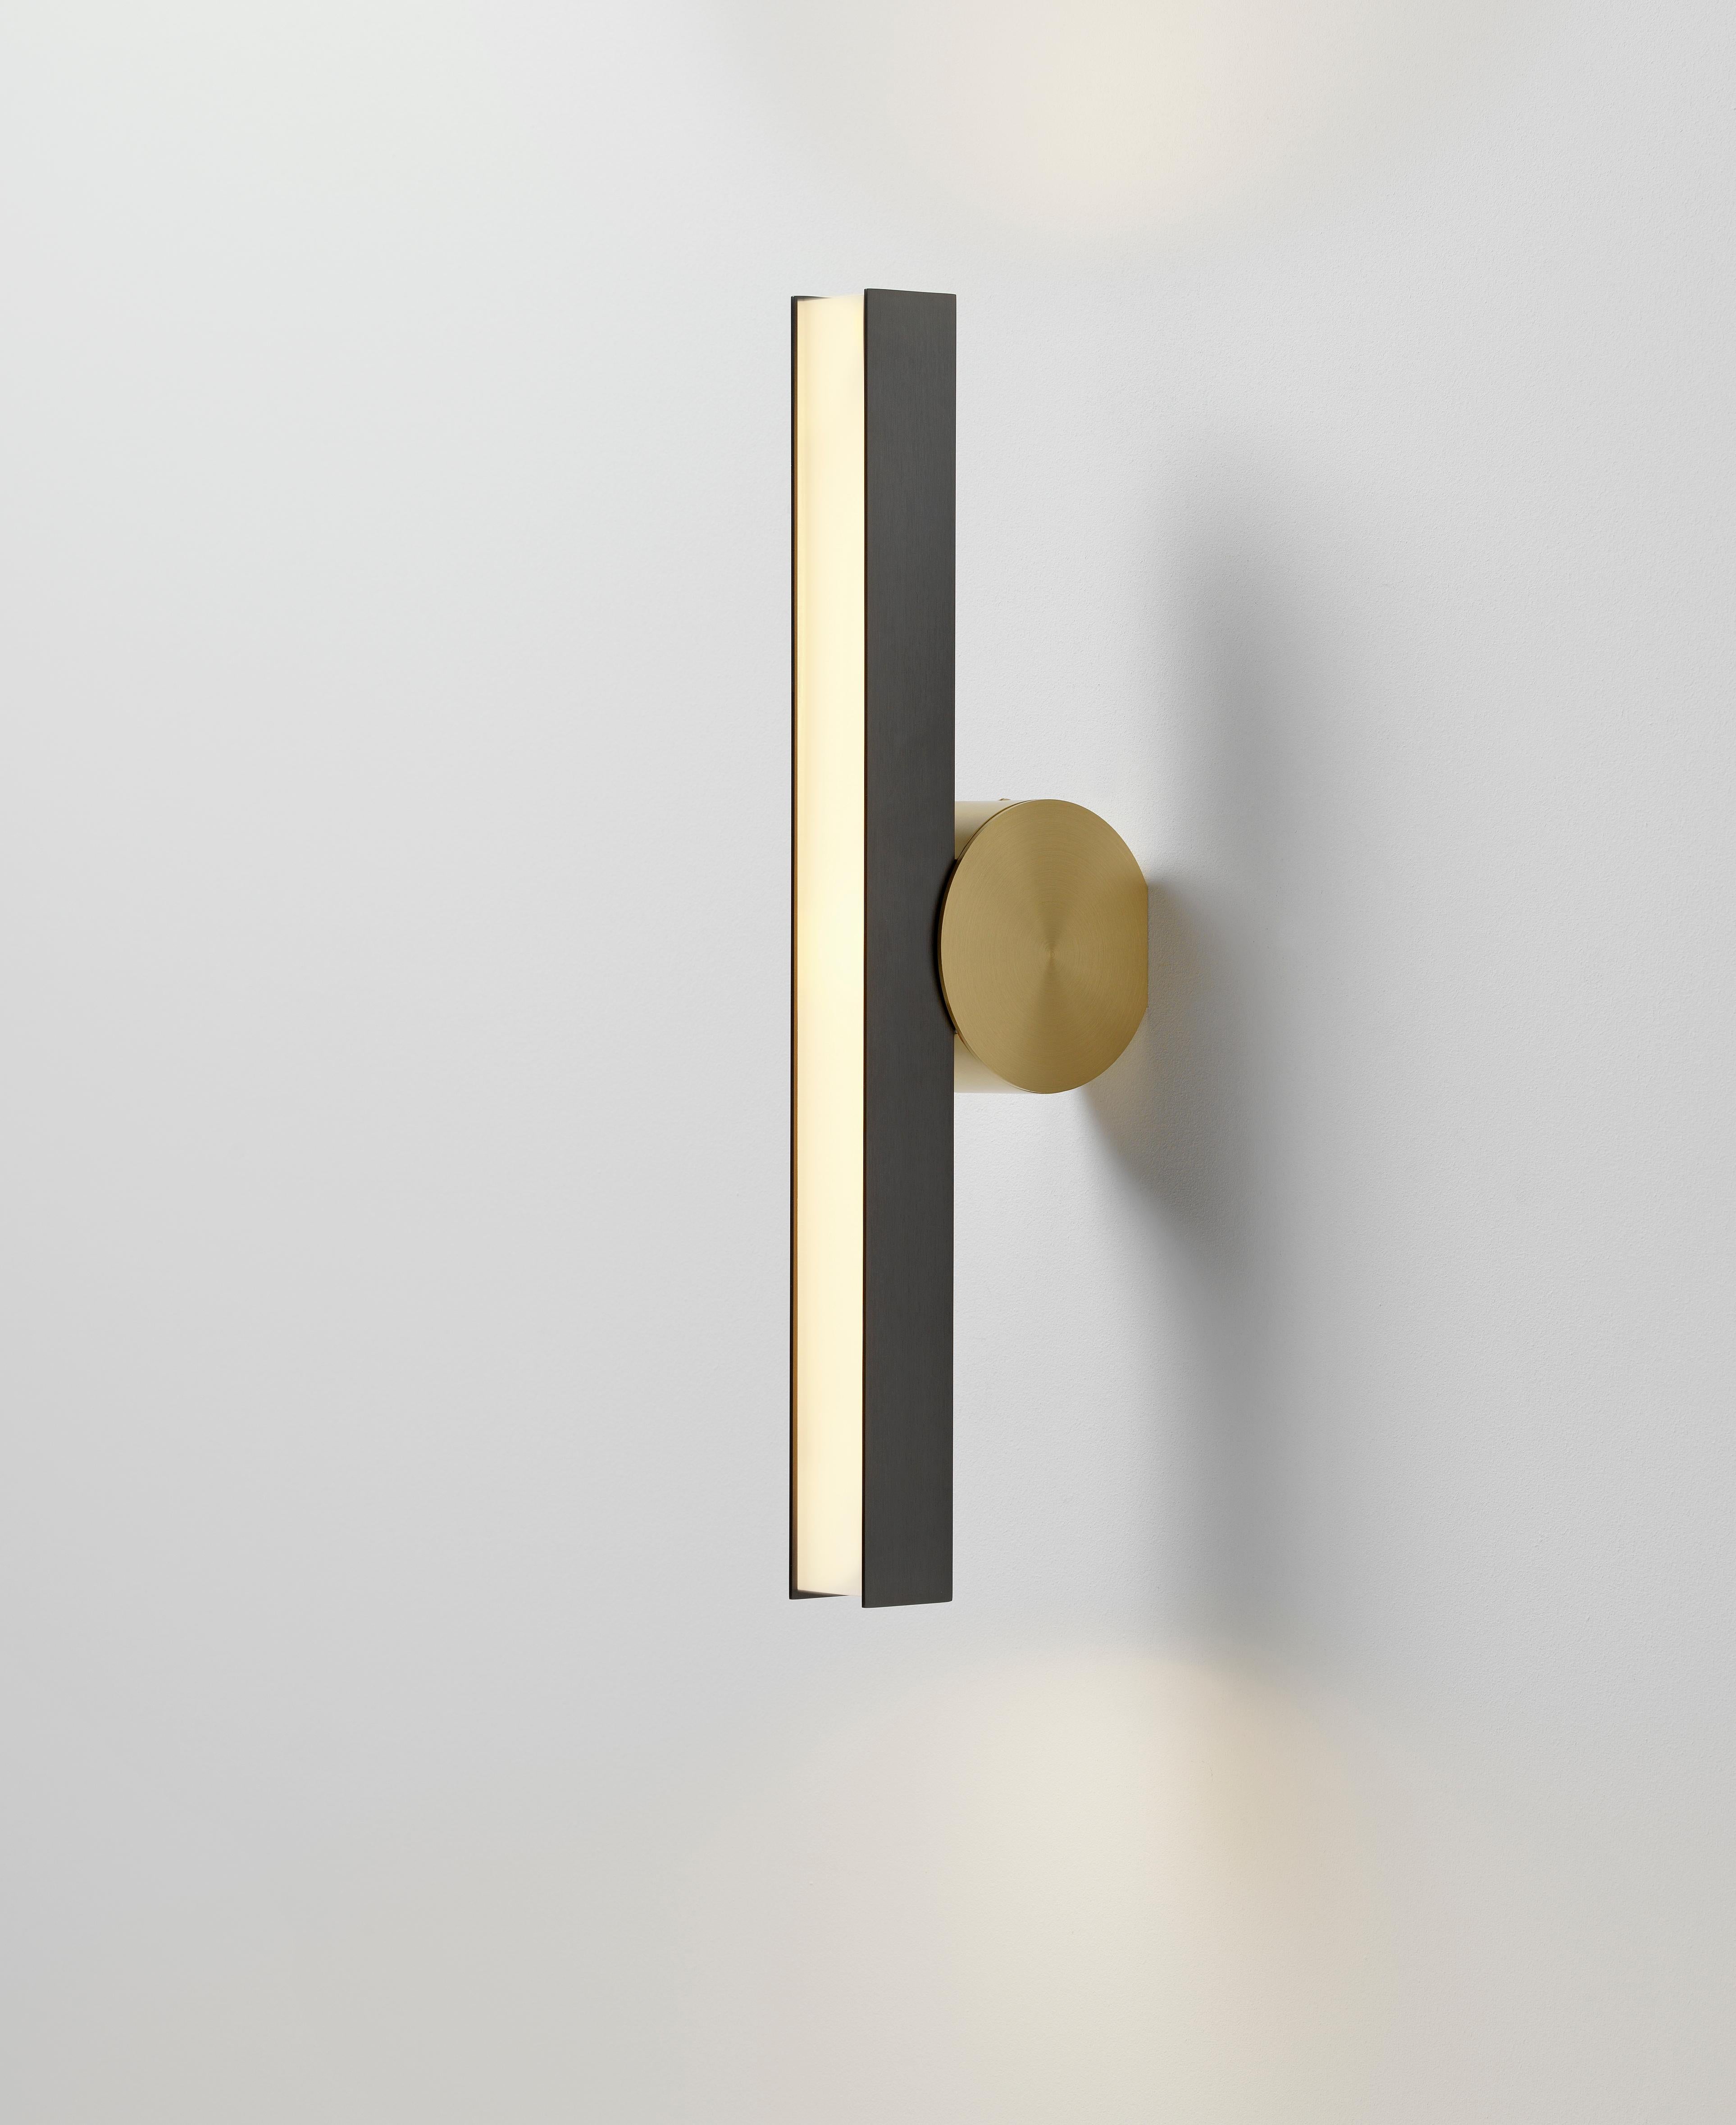 IP Calee V2 satin graphite and brass wall light by POOL
Dimensions: D13 x W4.4 X H45 cm
Materials: Solid brass, Satin Graphite, Satin Brass
Others finishes and dimensions available.

All our lamps can be wired according to each country. If sold